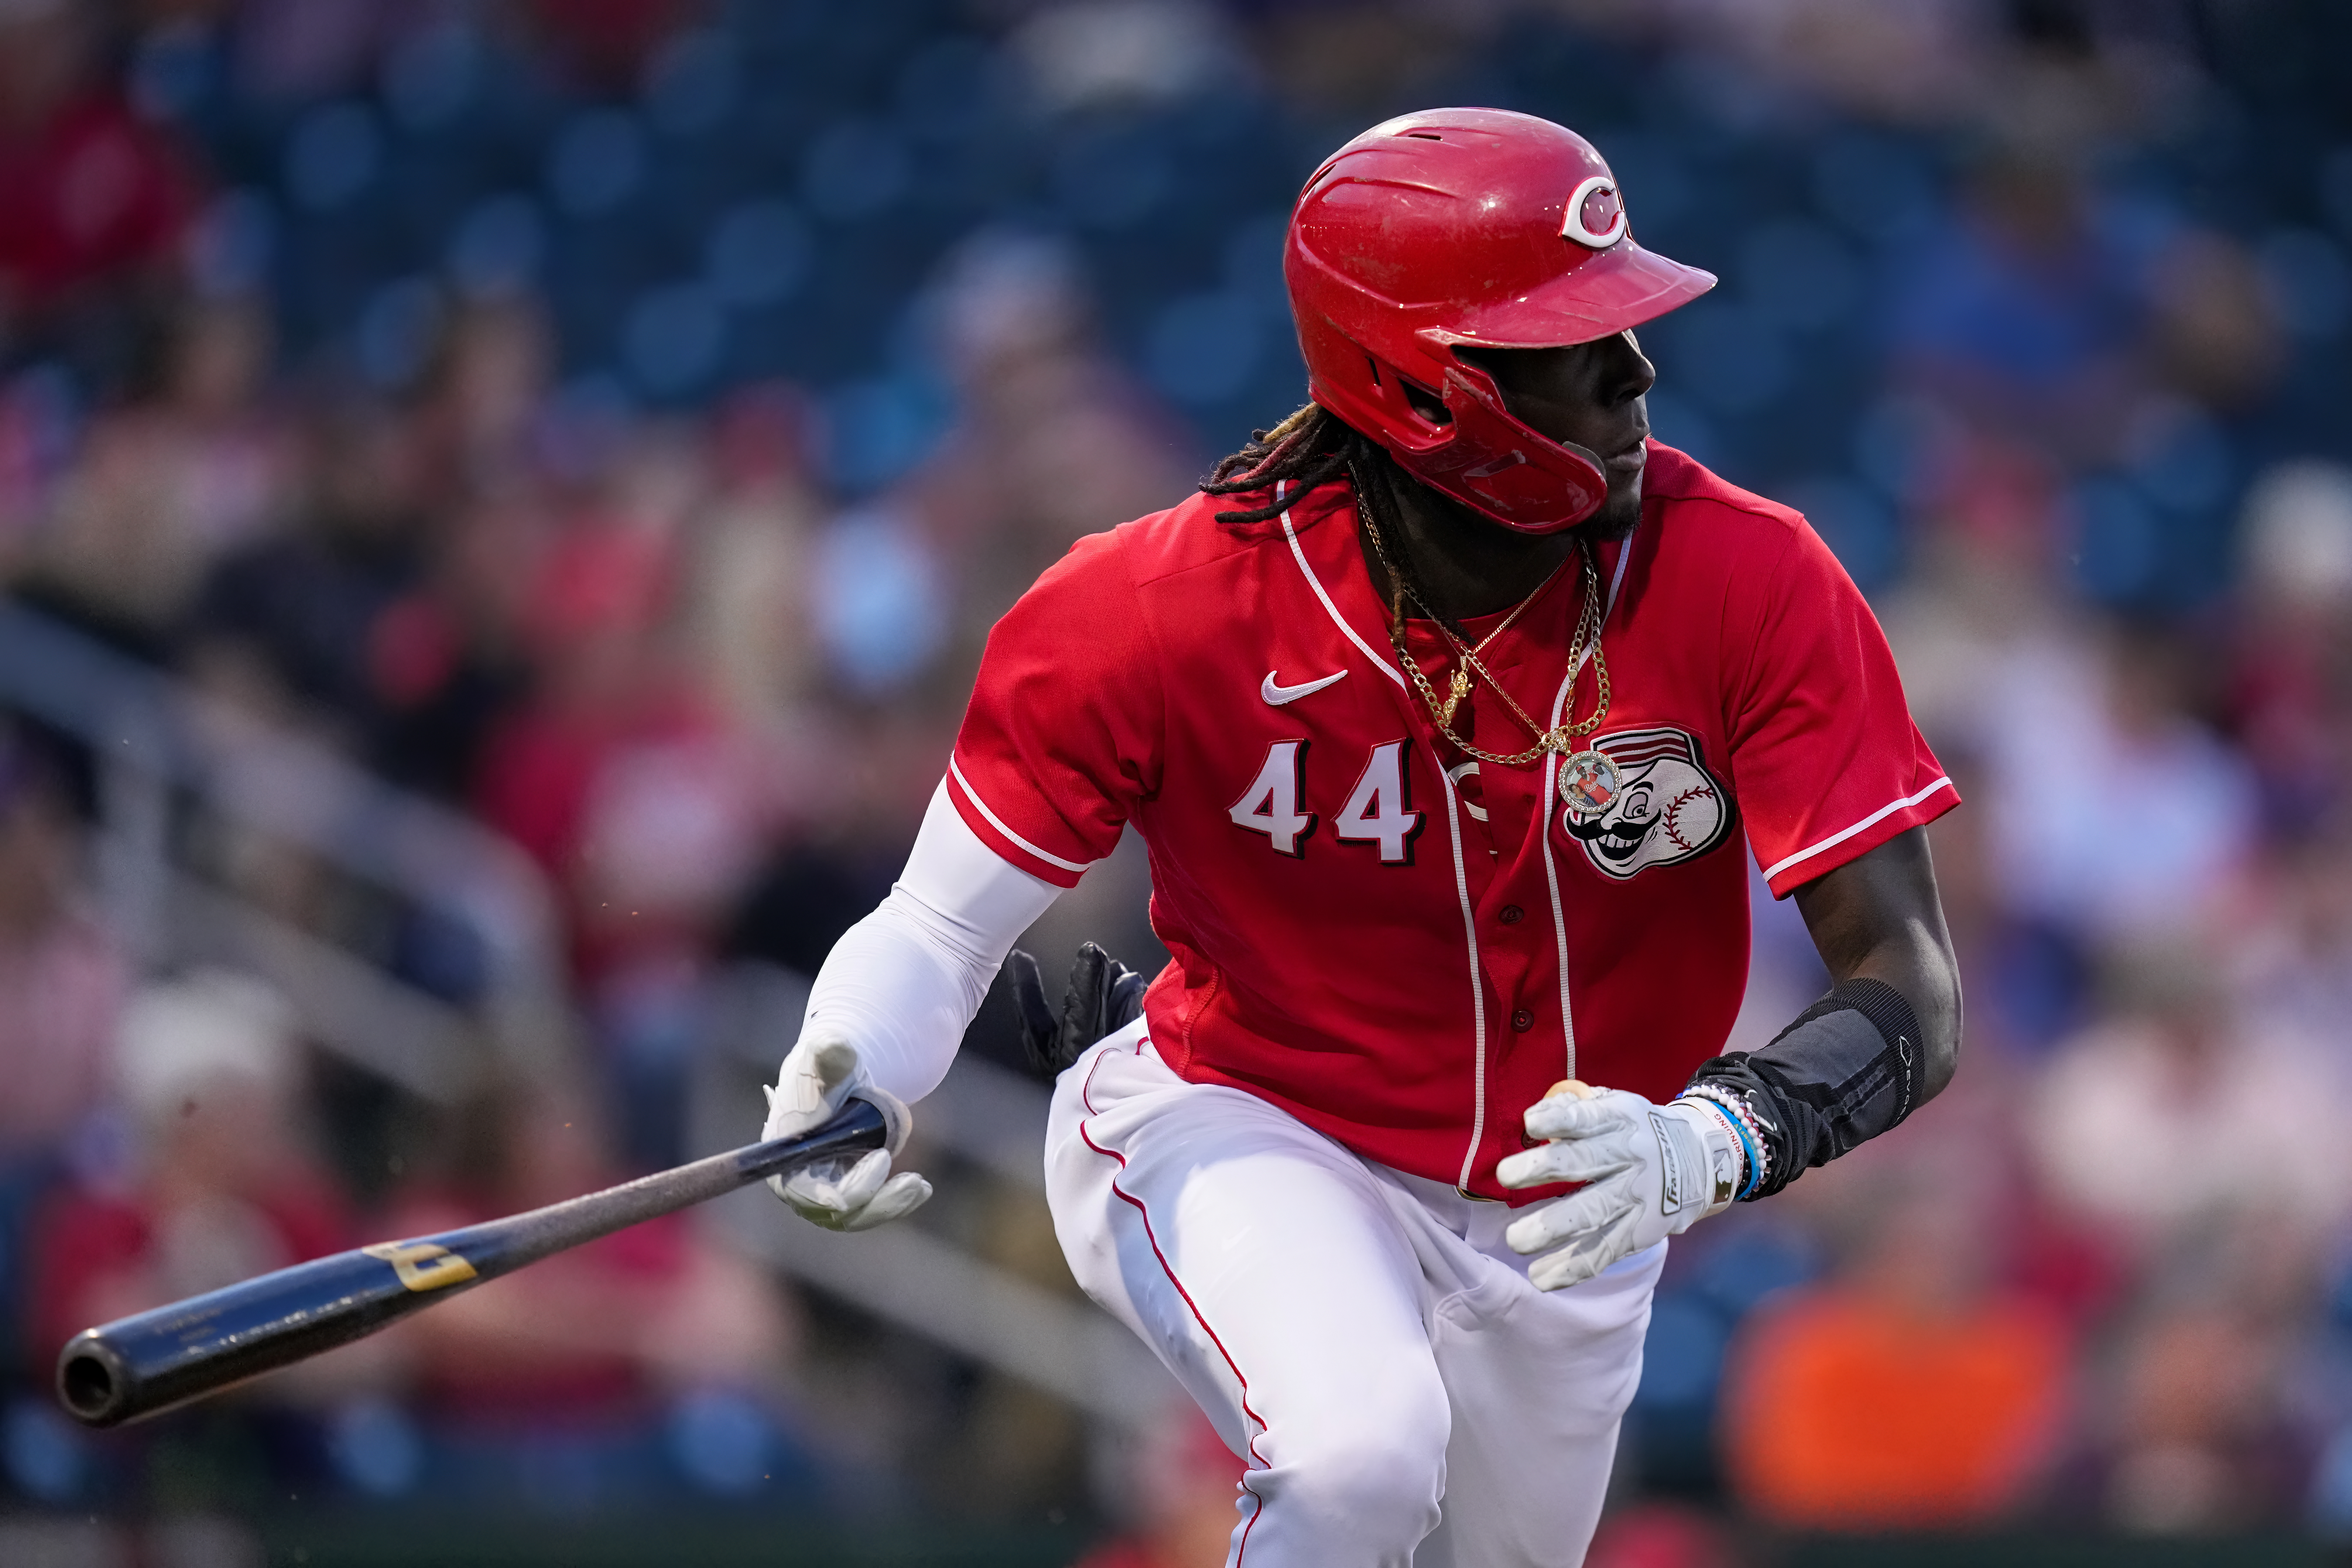 Reds: 3 players from the AL Central to target at the MLB trade deadline